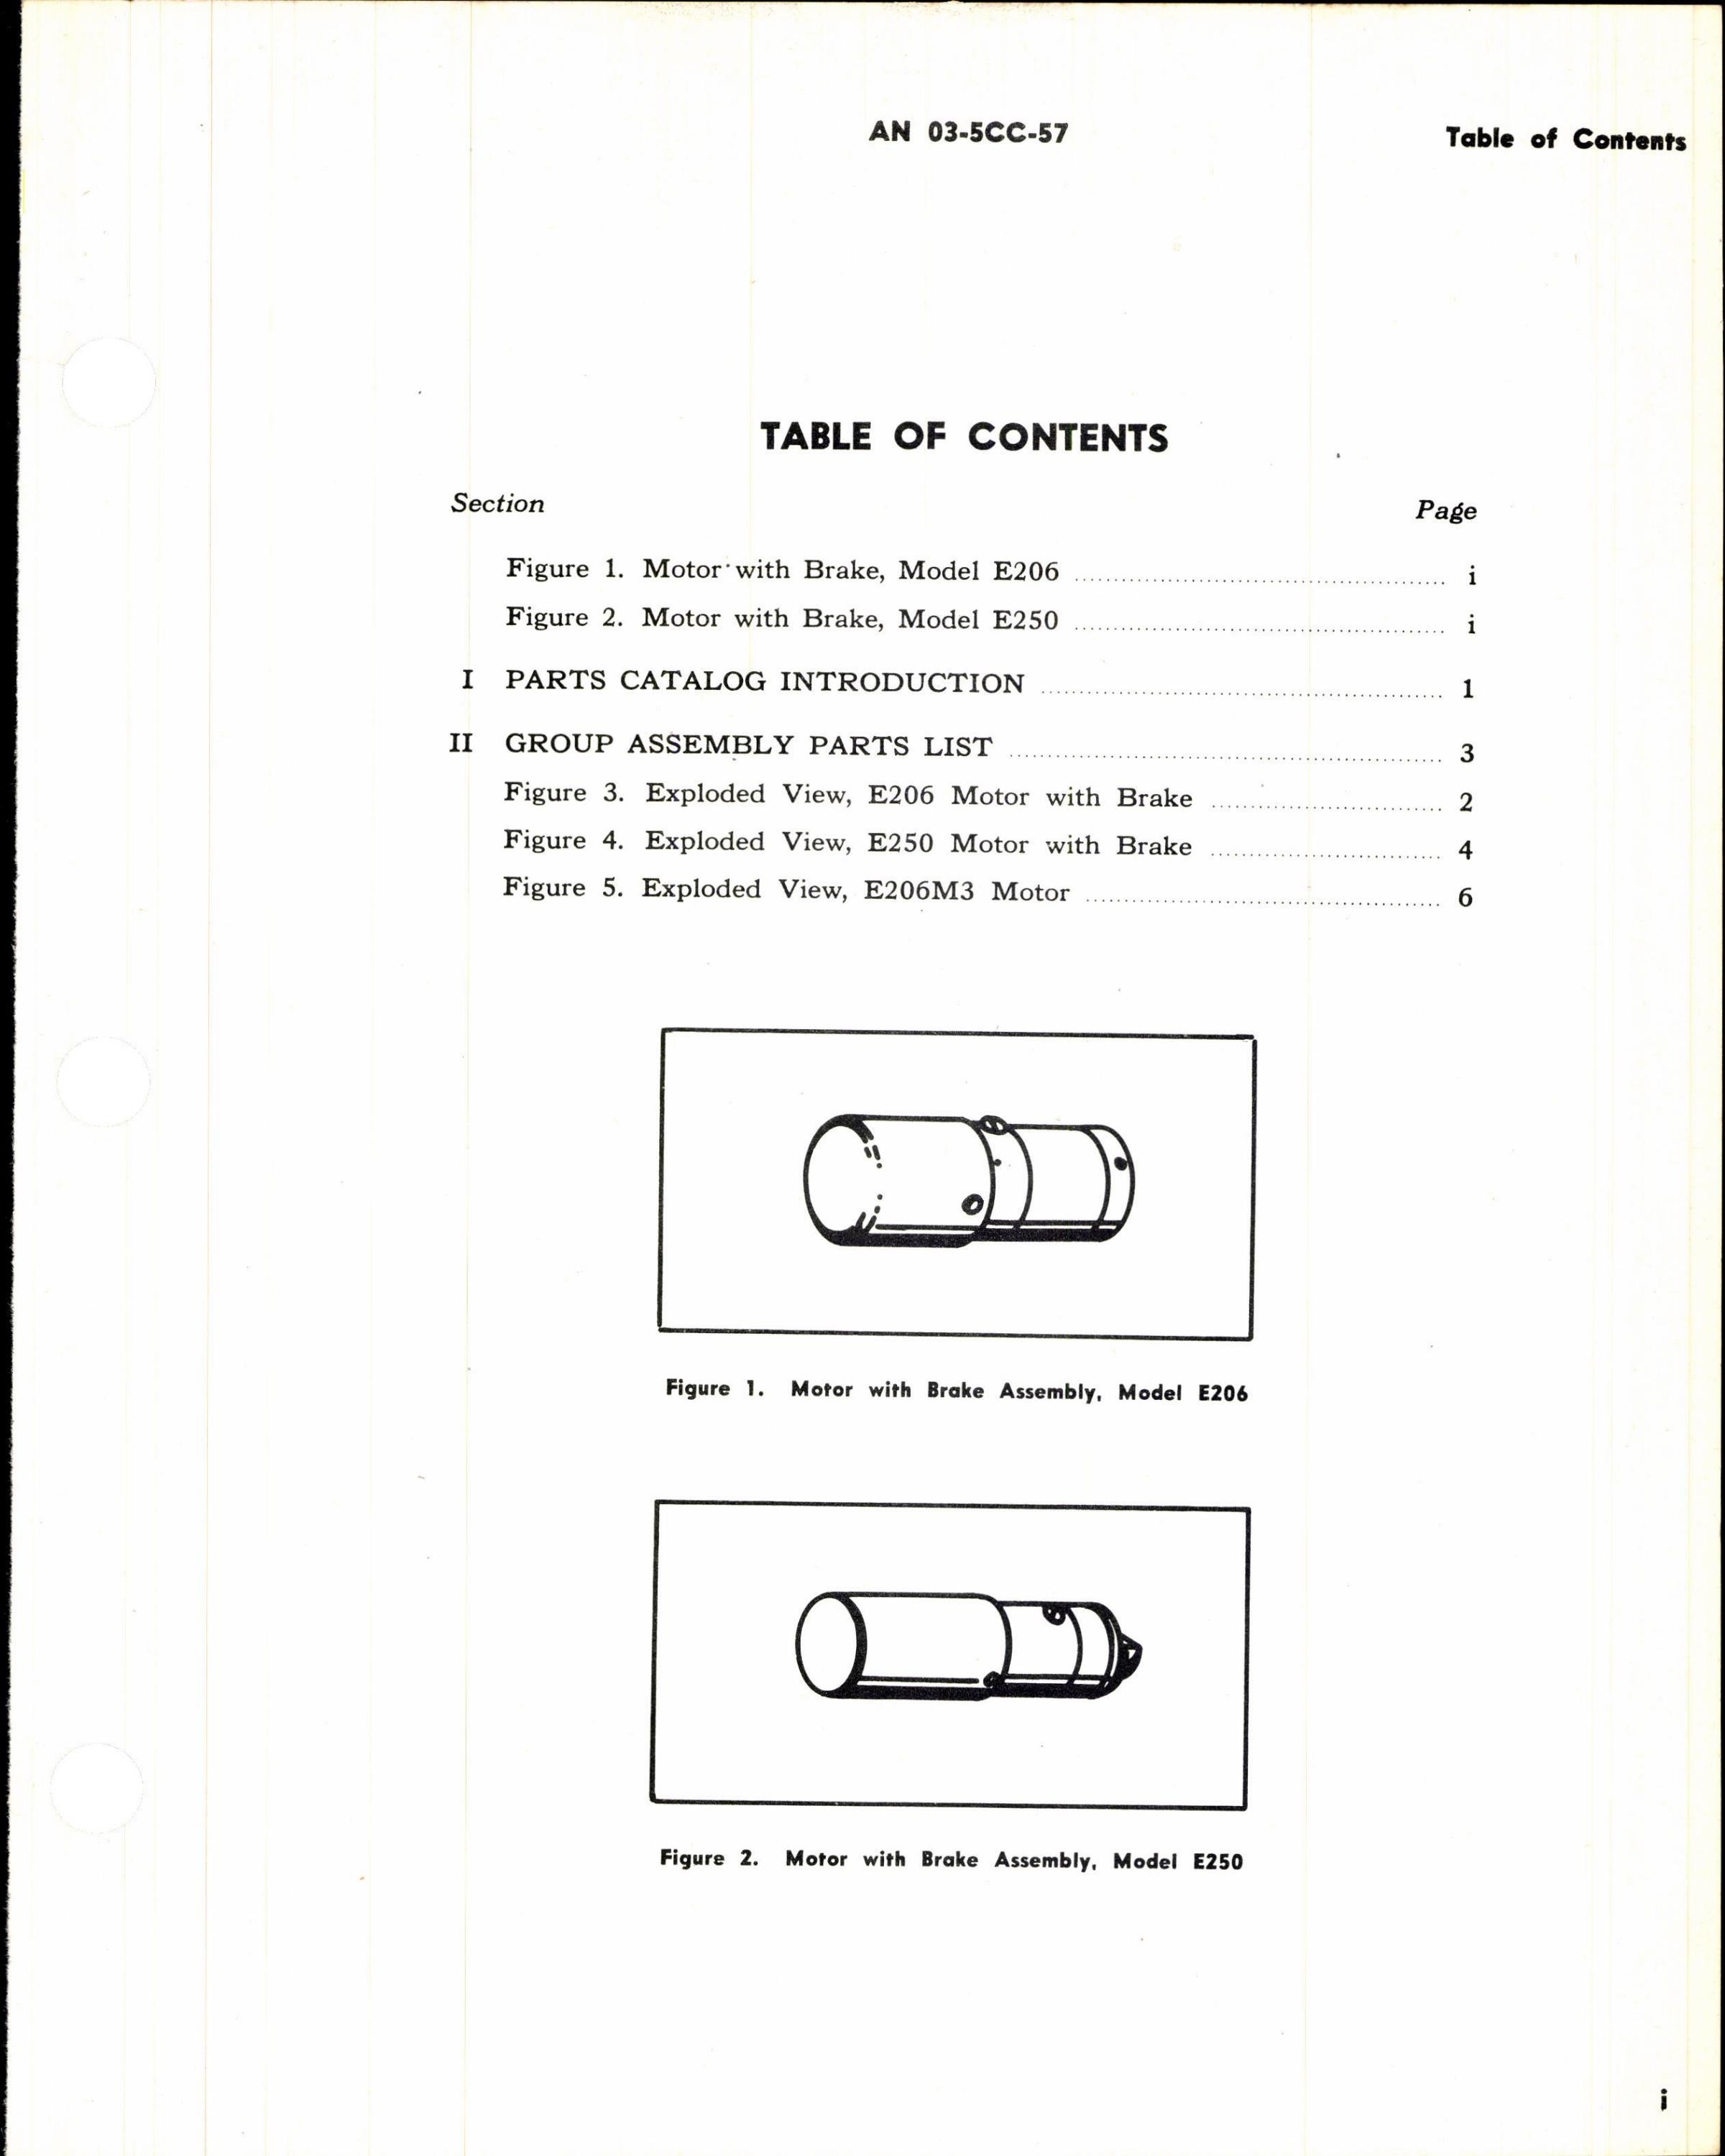 Sample page 3 from AirCorps Library document: Parts Catalog for Airborne Accessories Electric Motors